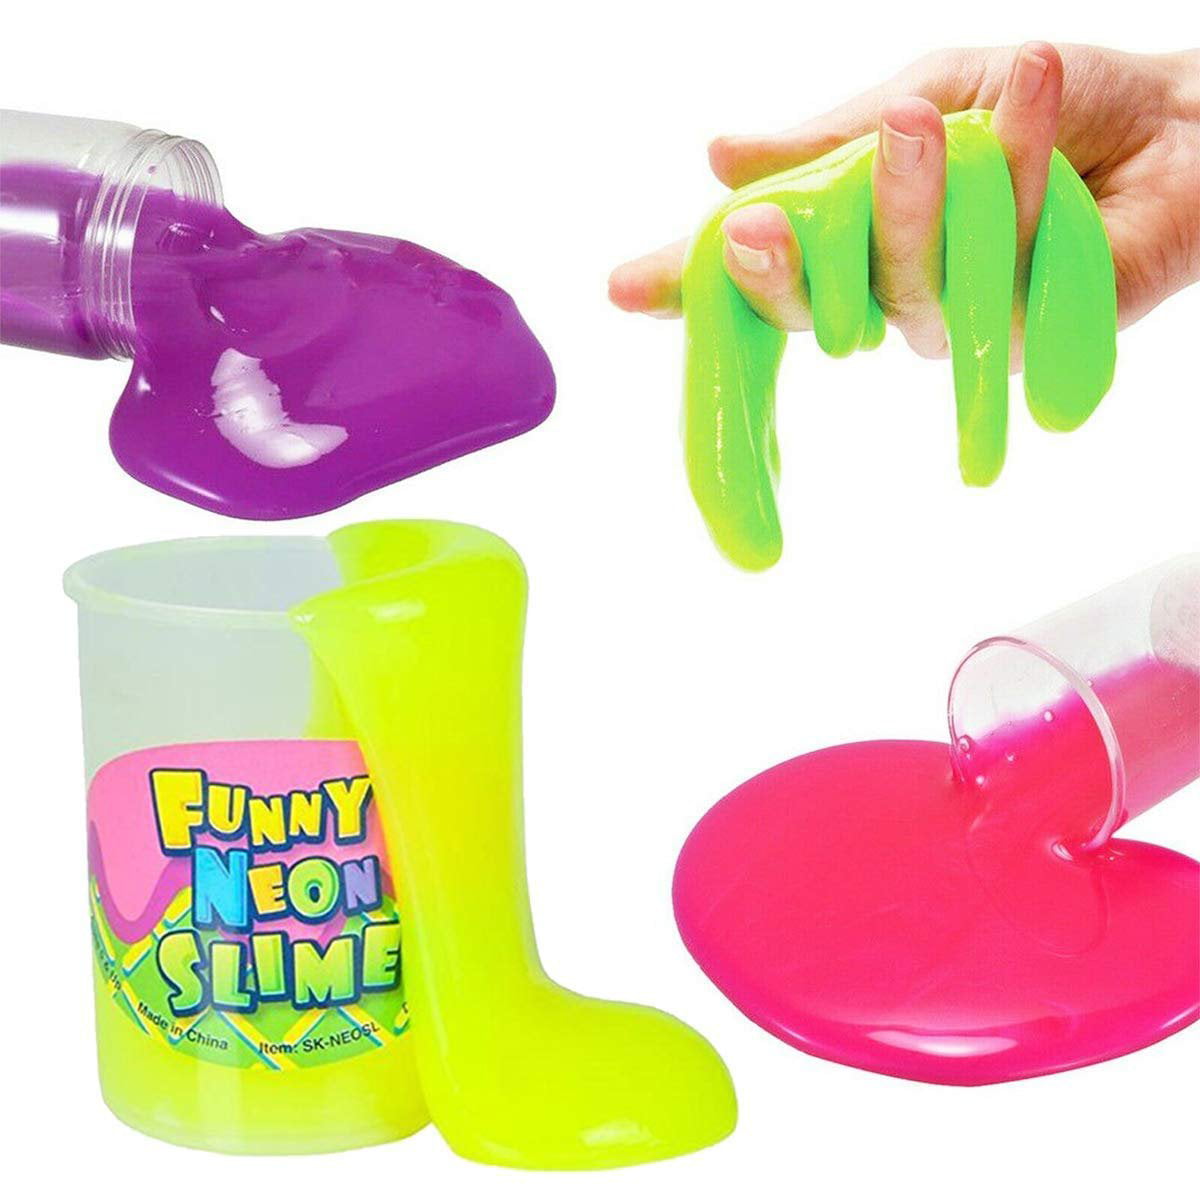 Pack of 6 Great for Any... Kicko Neon Slime Putty Sludgy Gooey Feeling 